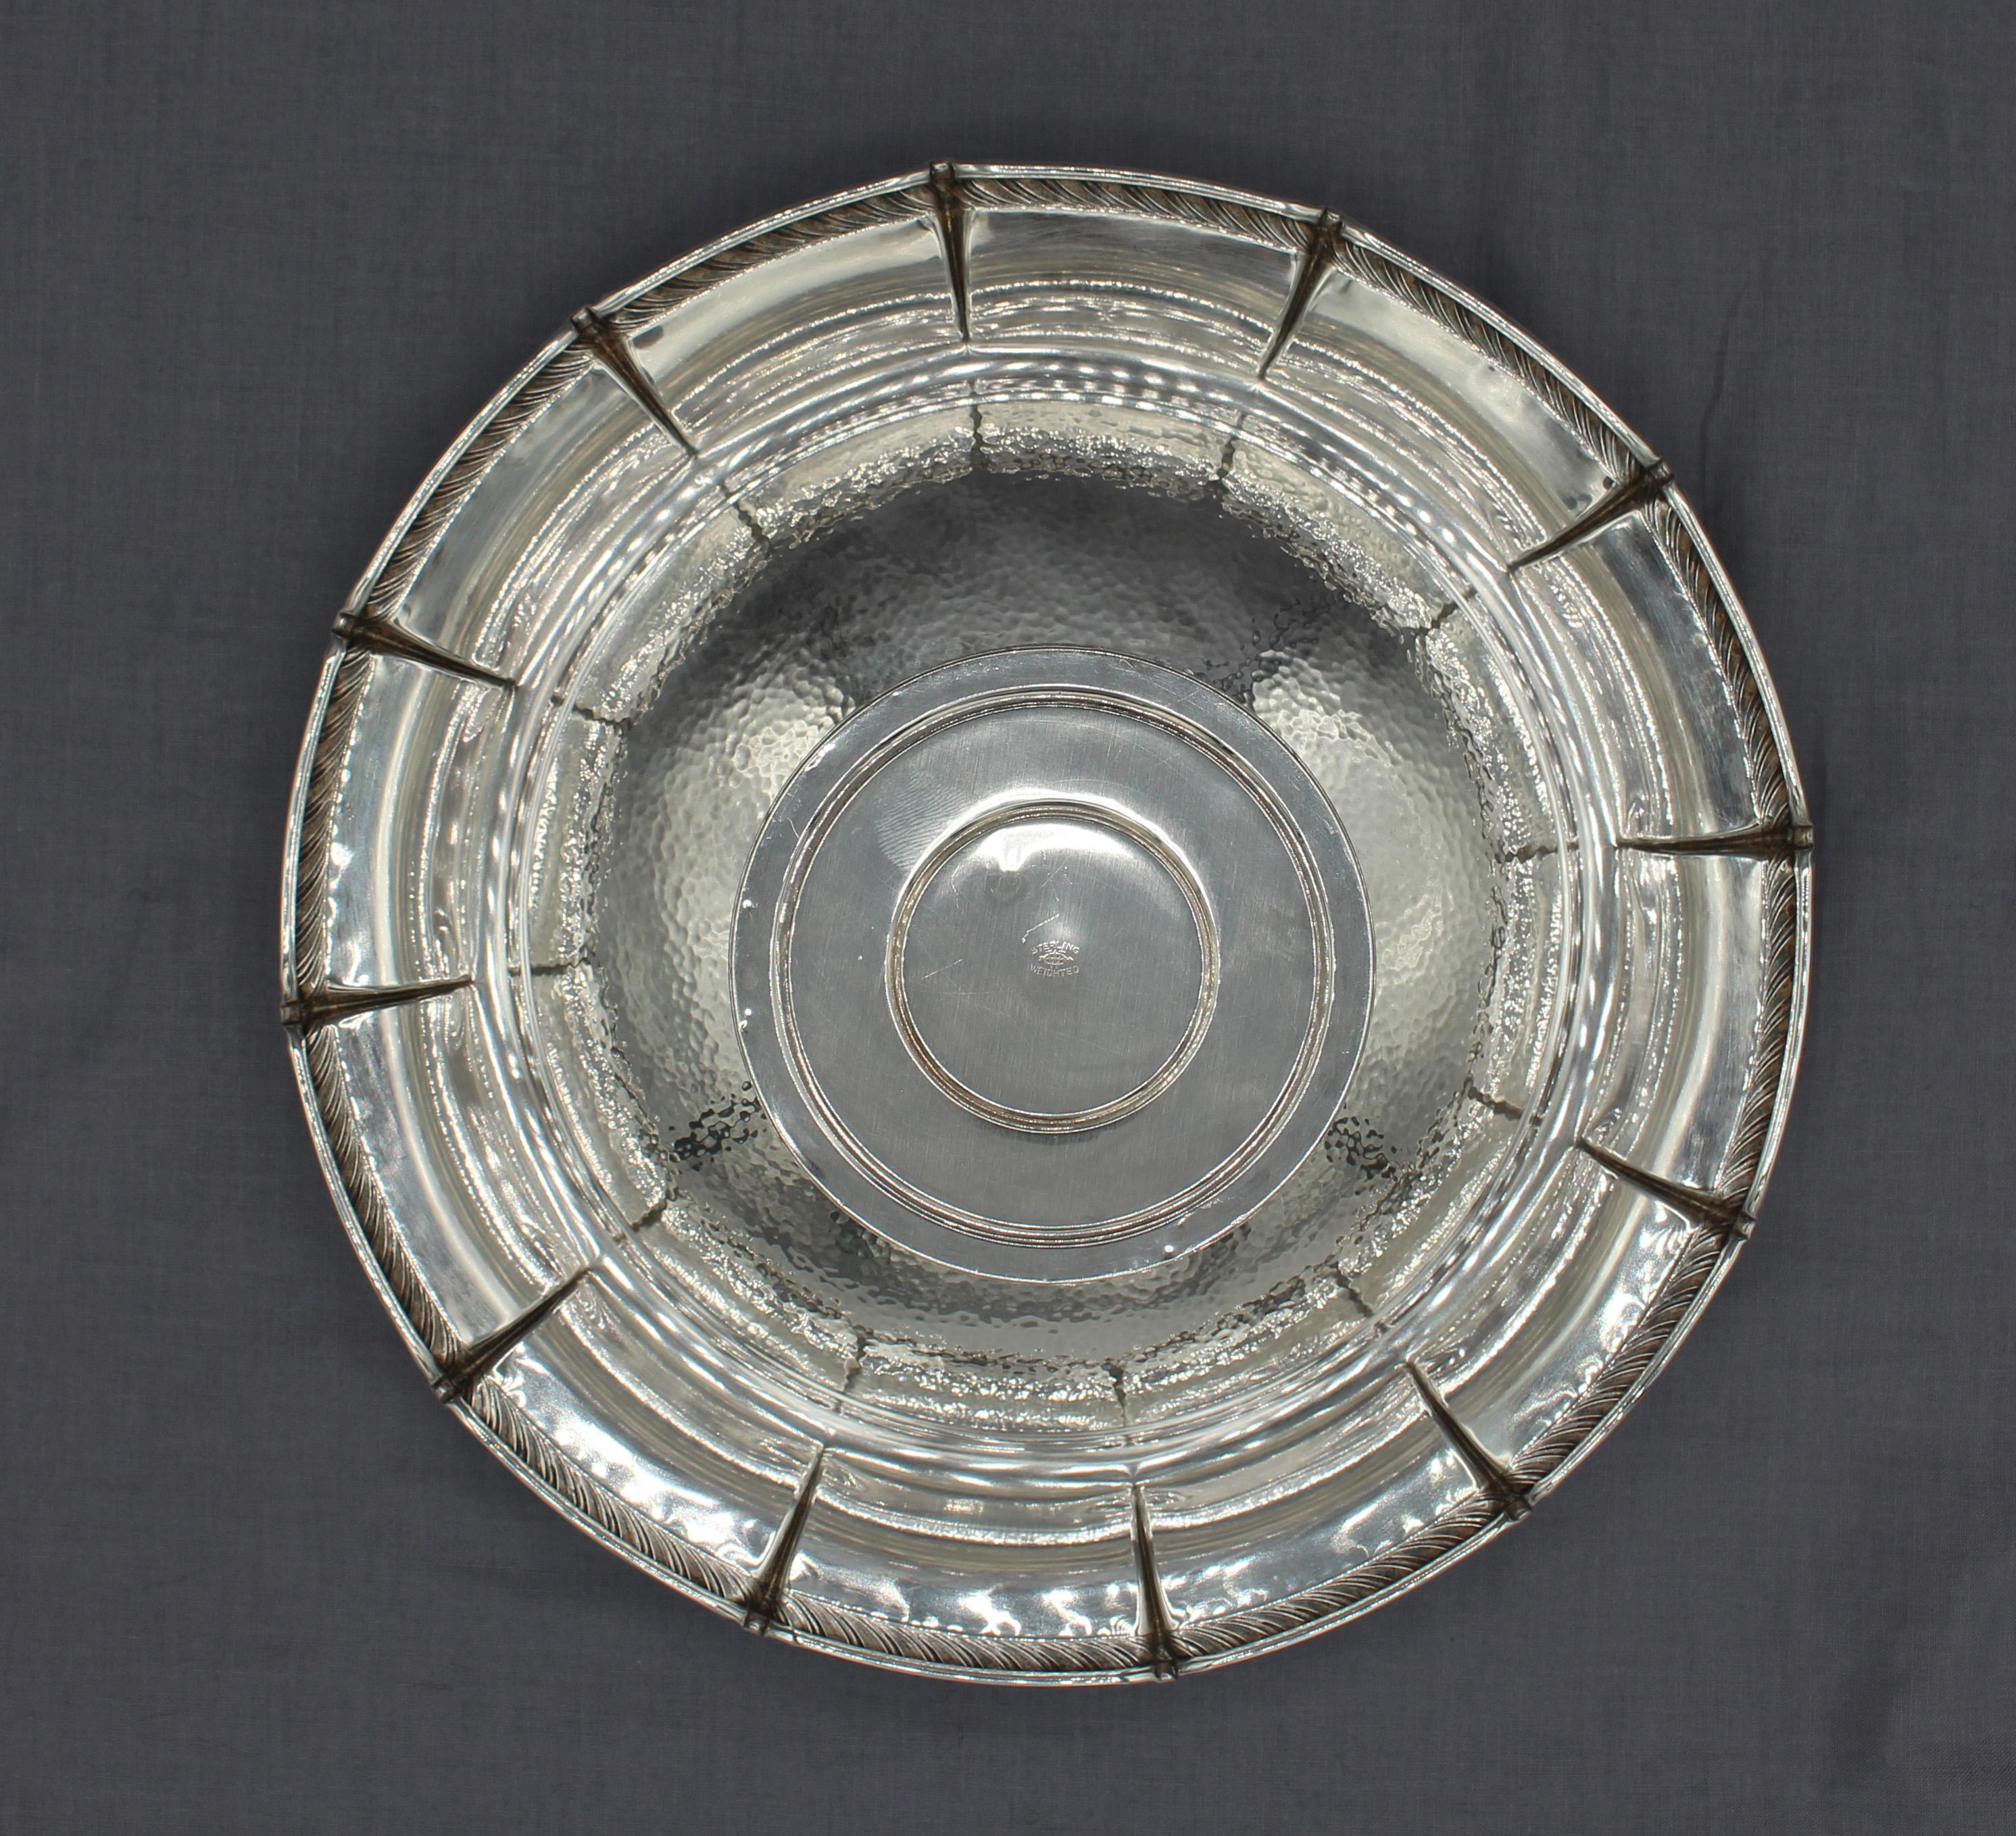 c. 1920-30s Webster Sterling Silver Compote In Good Condition For Sale In Chapel Hill, NC